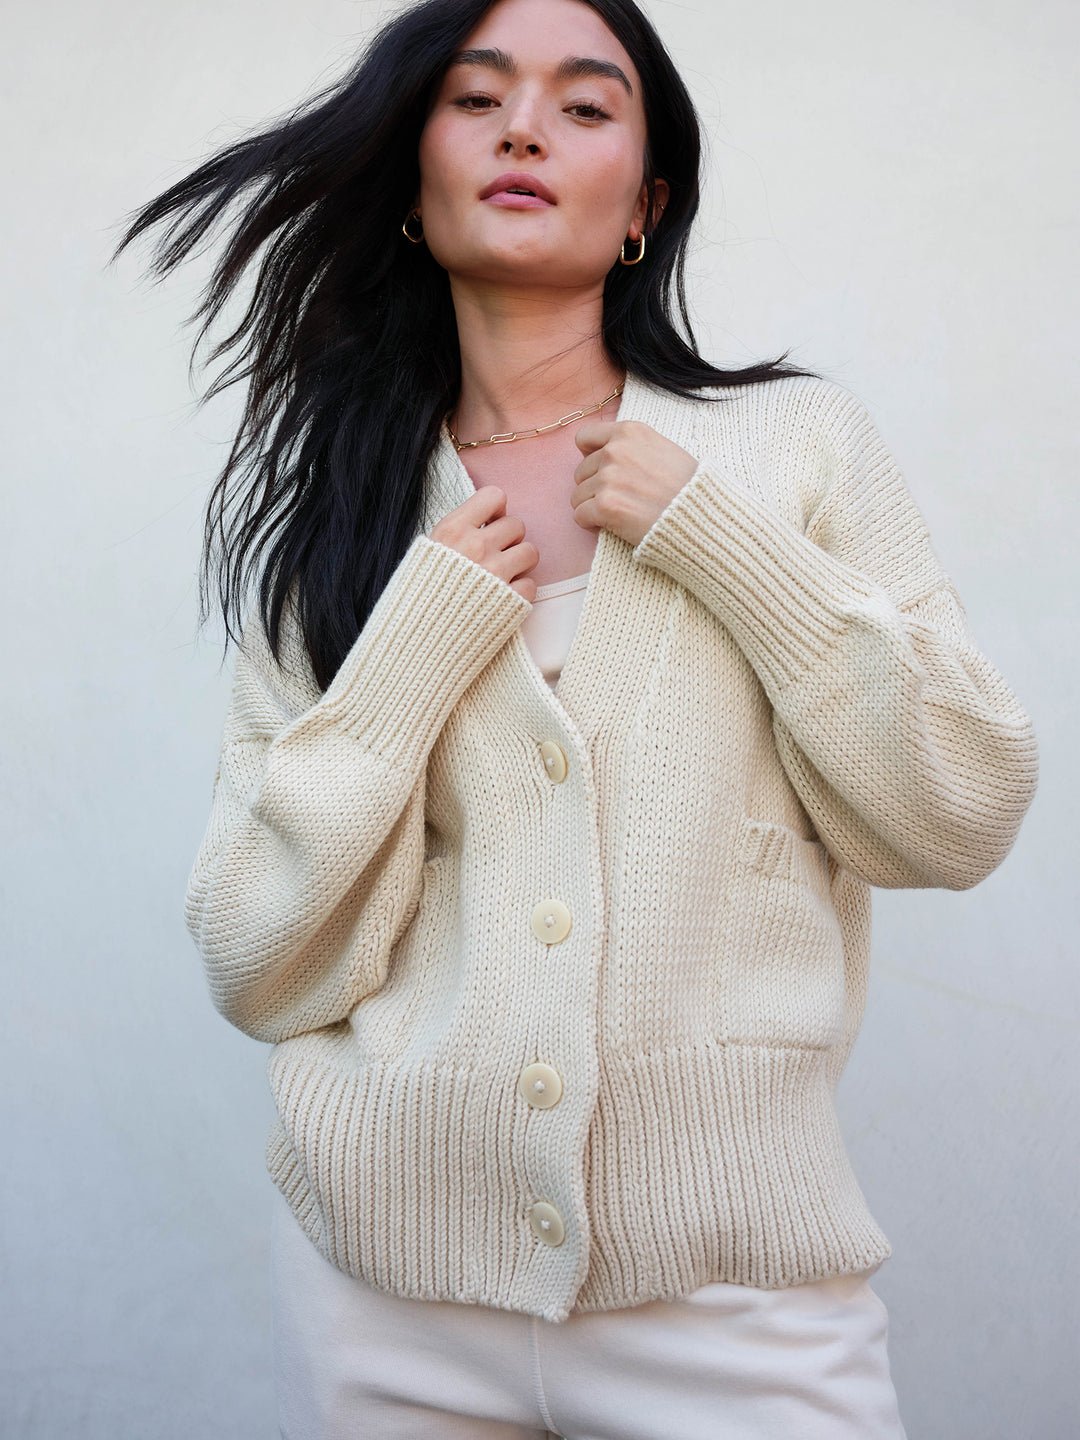 11 Eco and Ethical Sweaters to Keep You Warm This Winter